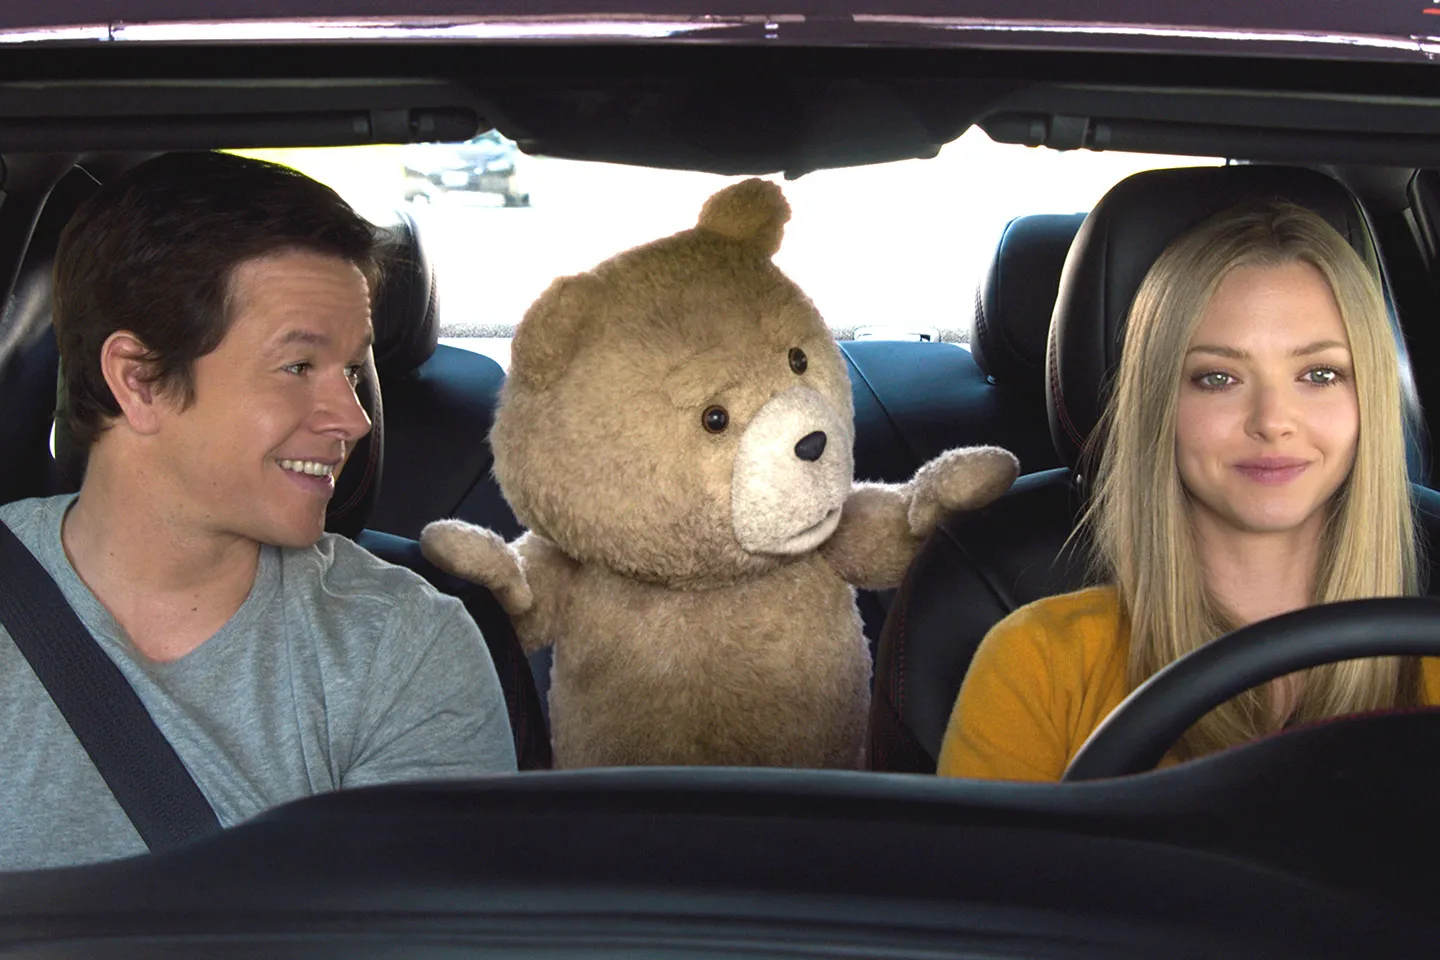 TED Movie Franchise: Revolutionizing the Way We Consume Information and Entertainment